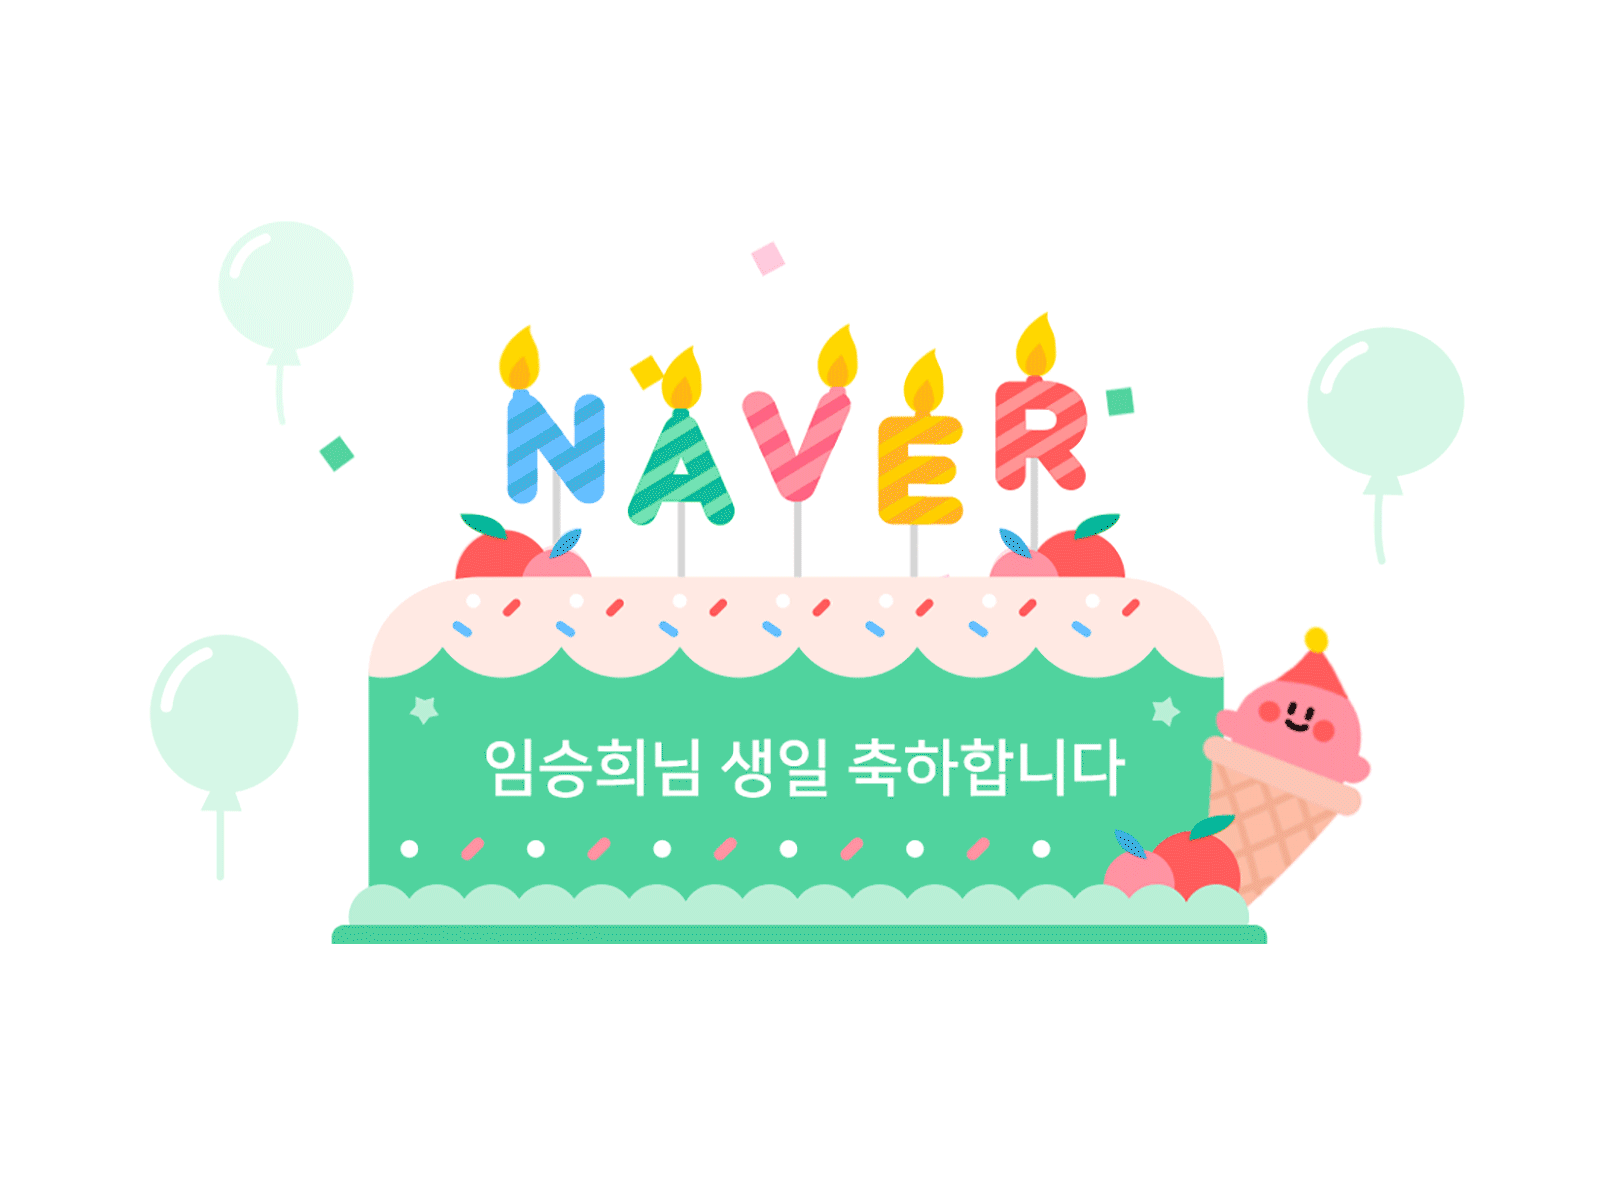 Happy Birthday Template | PosterMyWall